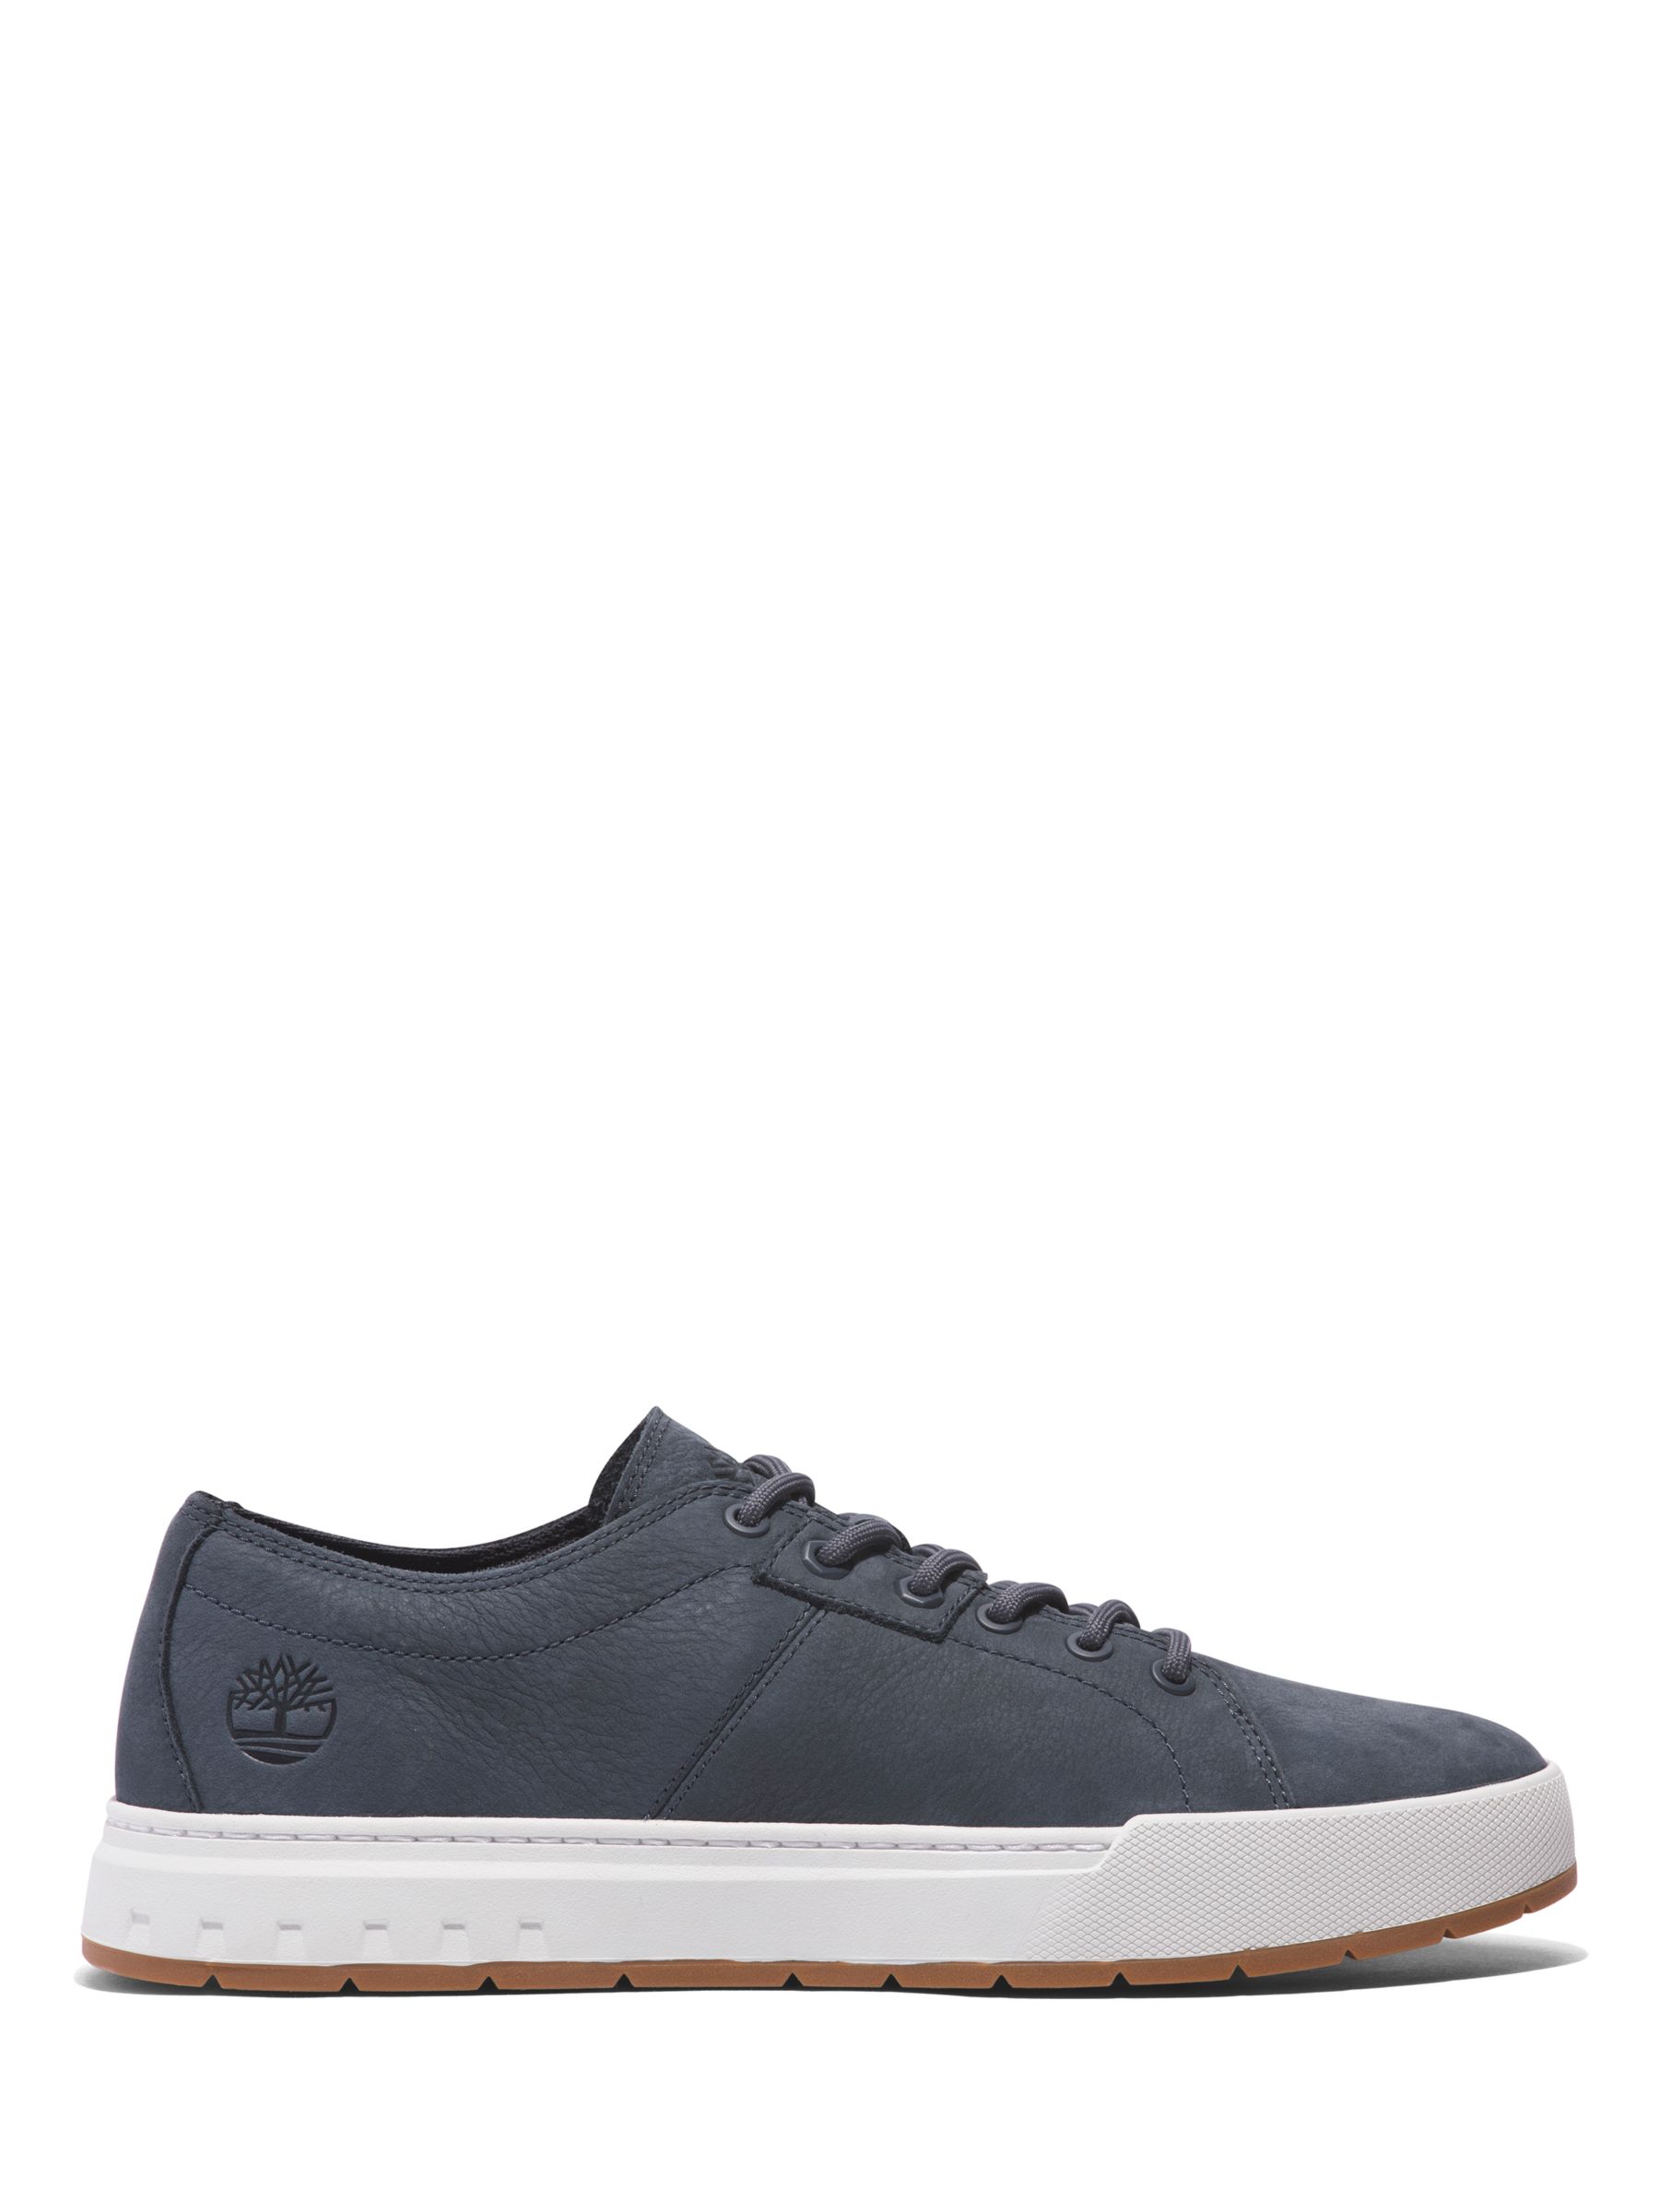 Timberland Maple Grove Low Top Leather Trainers, Navy, 8